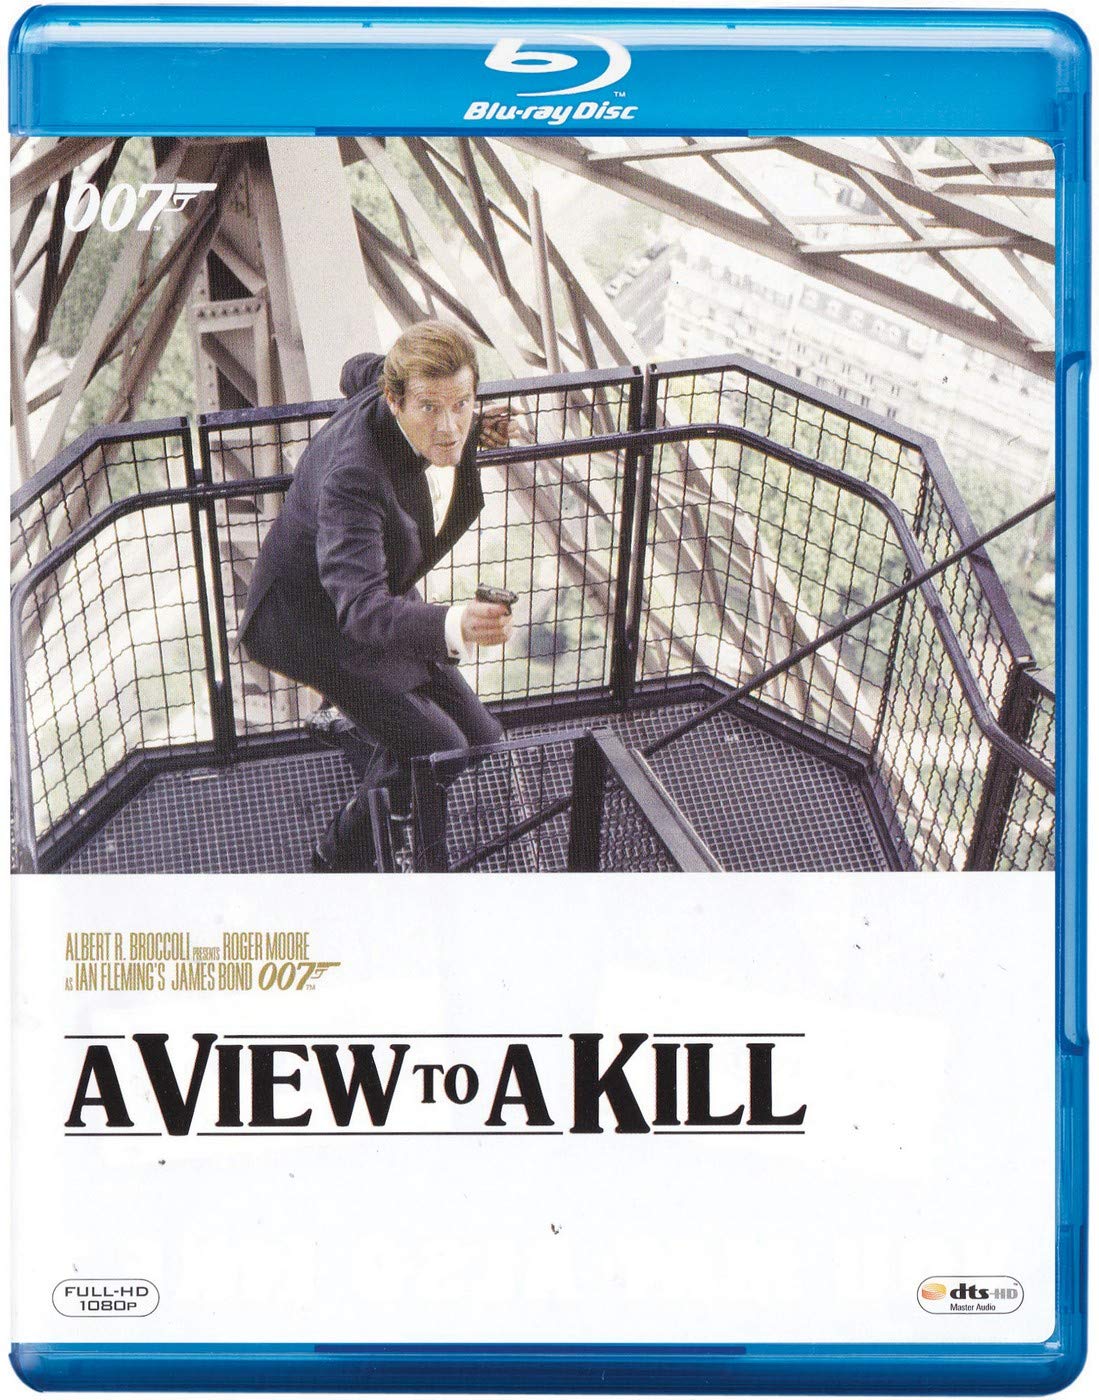 007-a-view-to-kill-roger-moore-as-james-bond-movie-purchase-or-watc